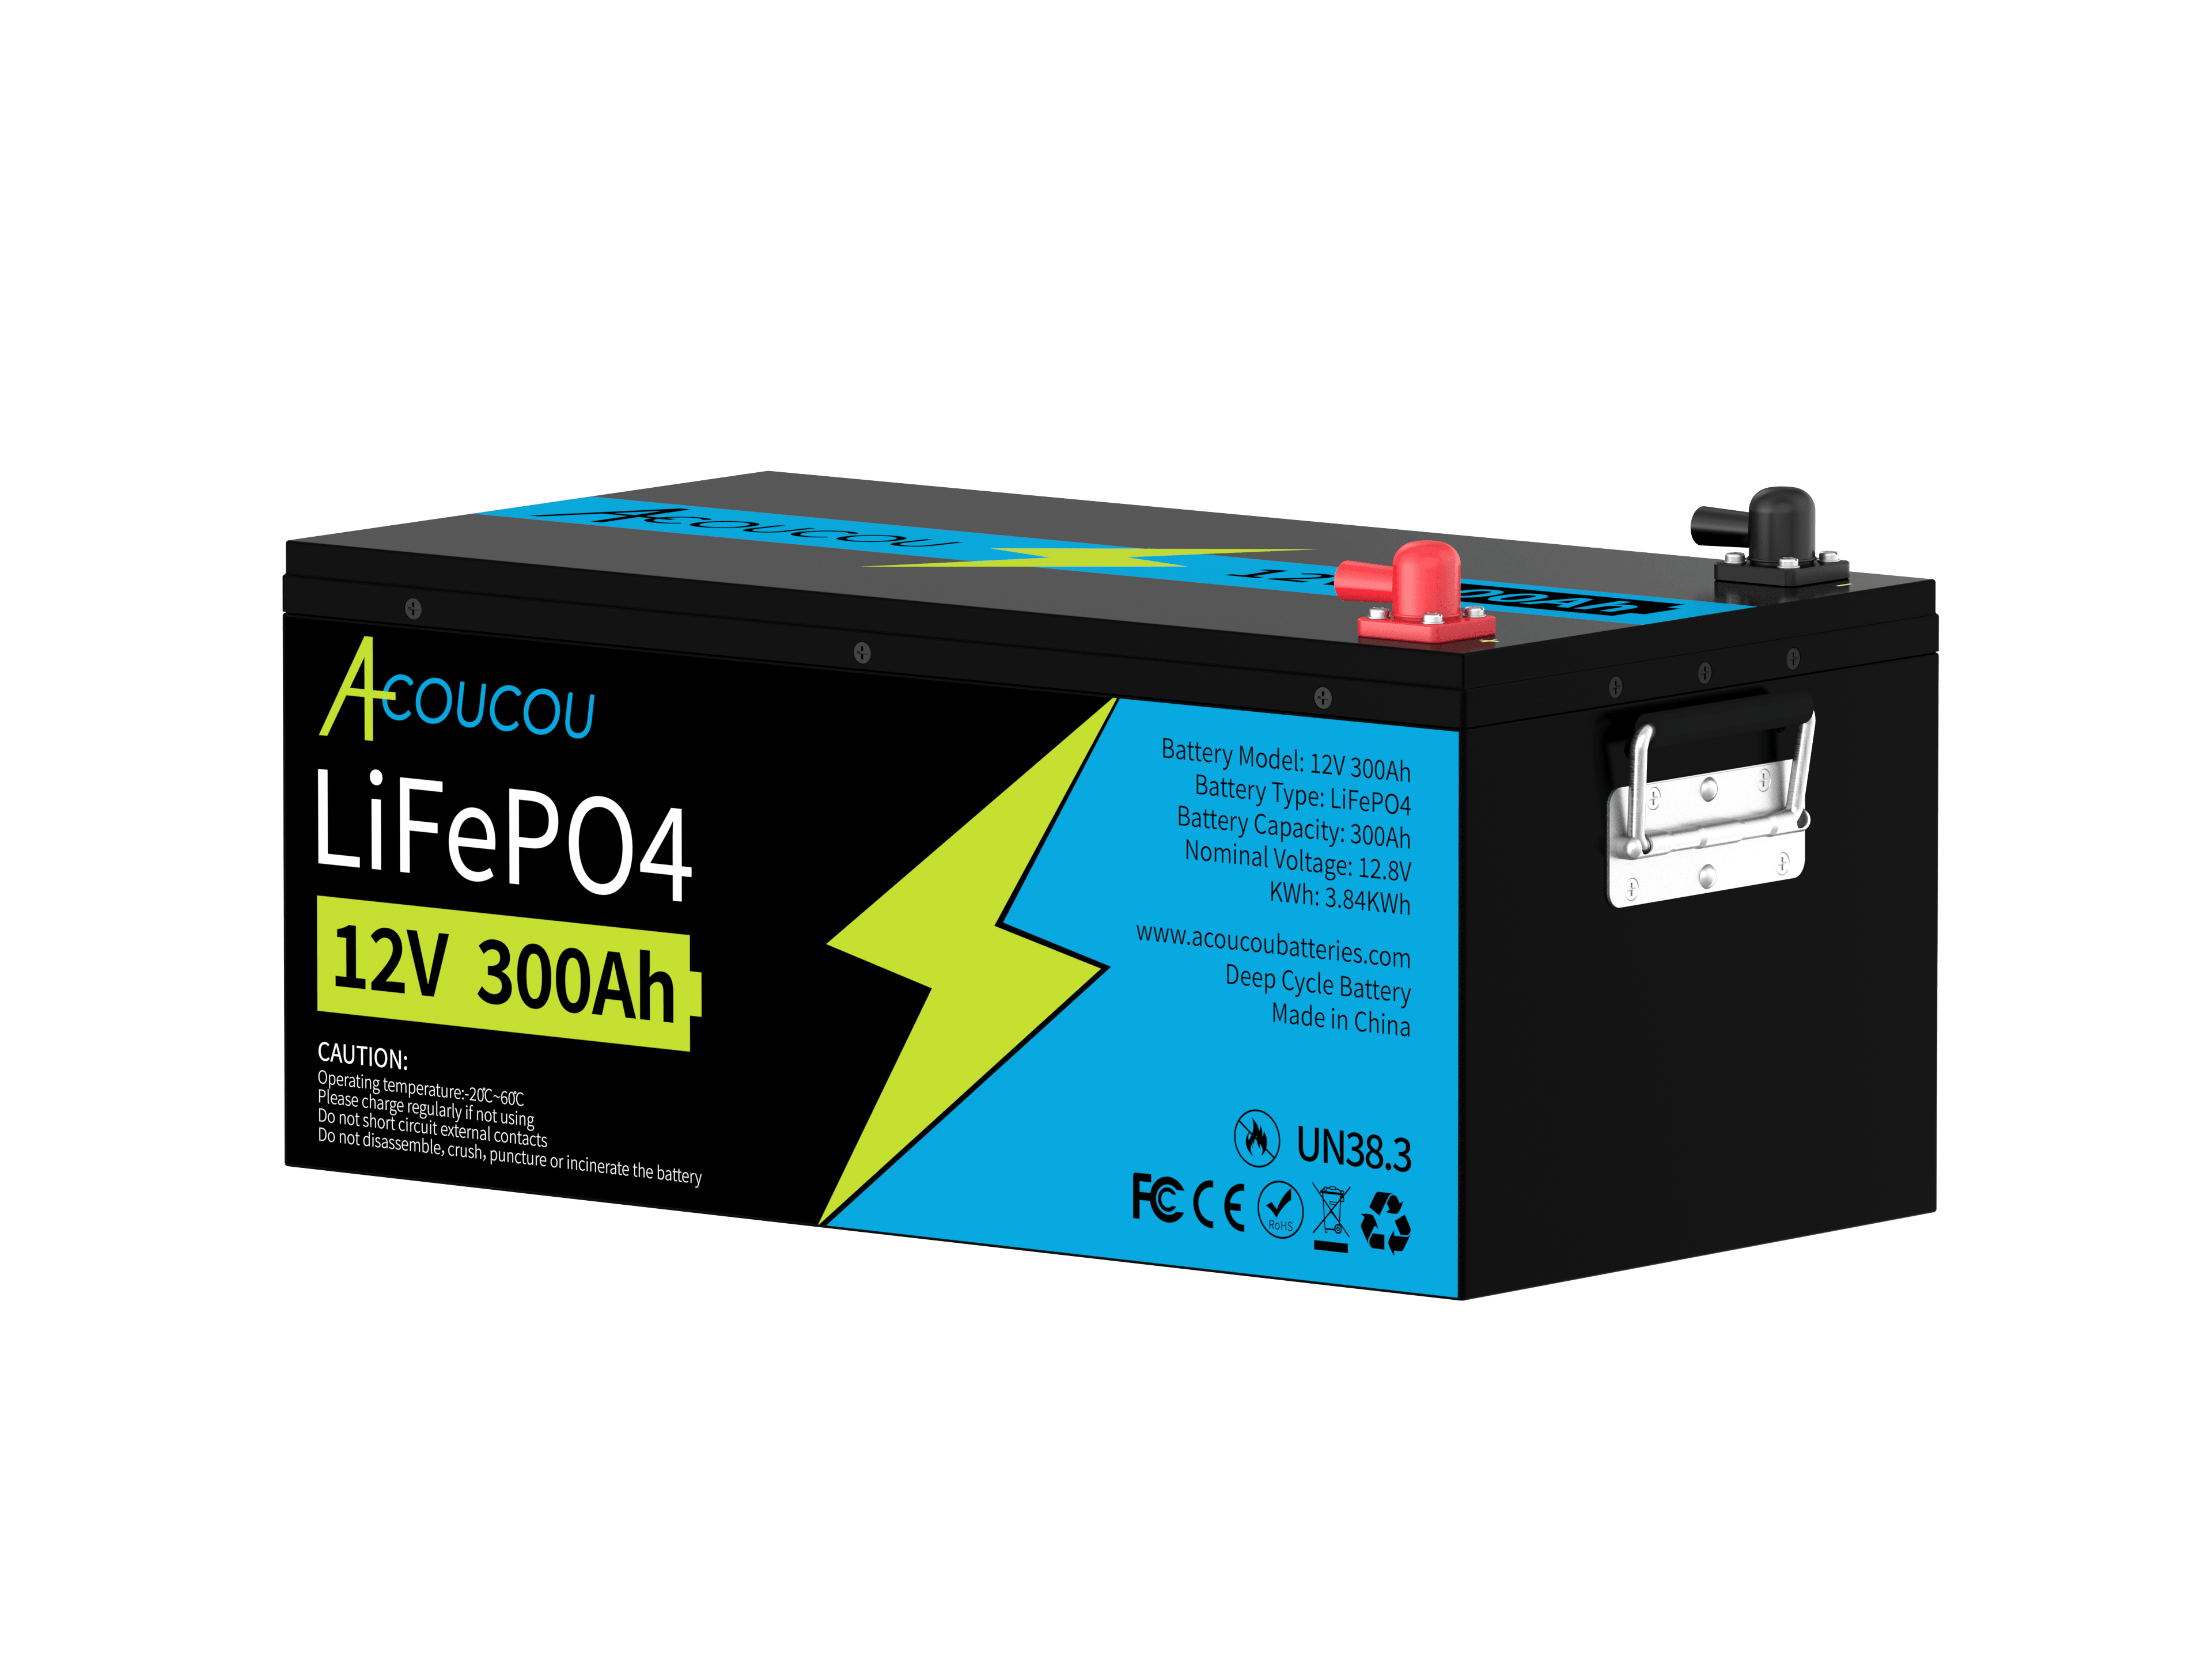 Acoucou MaxOne 12V 300Ah Bluetooth Lithium LiFePO4 Deep Cycle Battery,RV Marine Motor Golfcart Battery - Acoucoubatteries